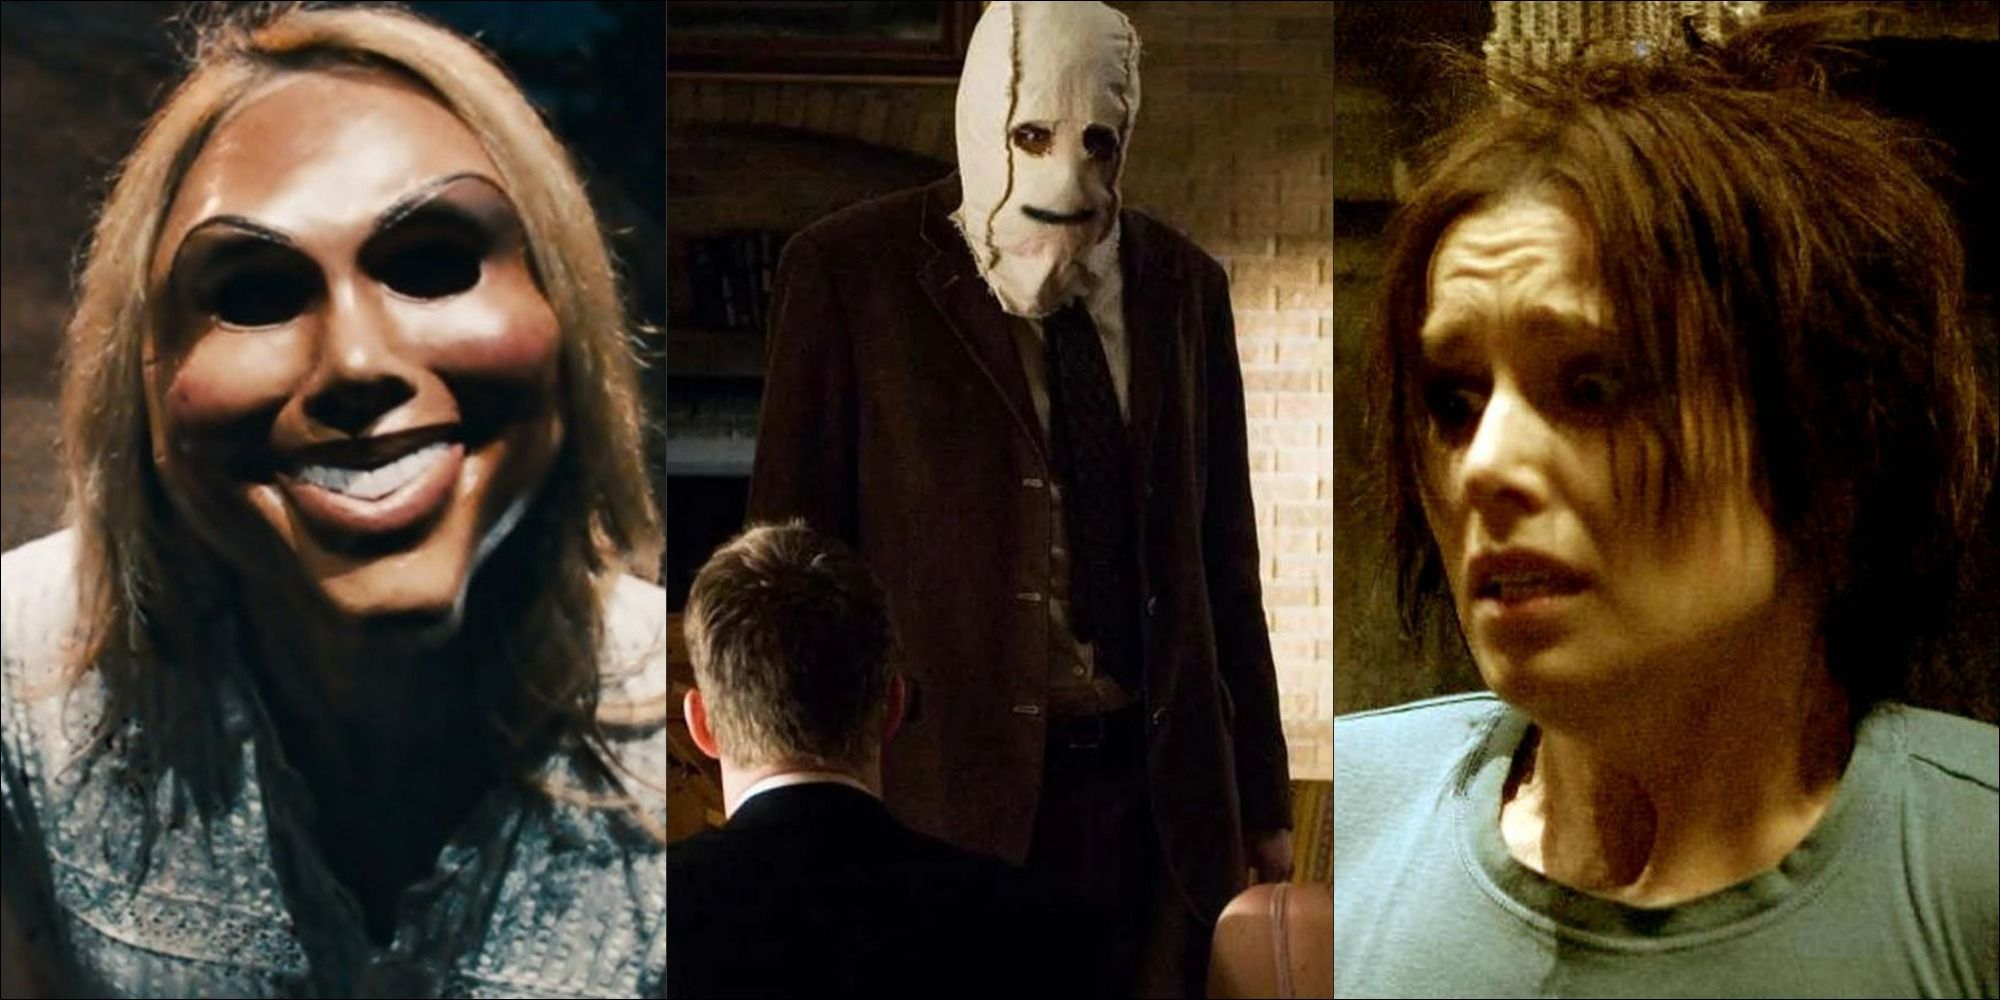 Close-up of the masked villains from The Purge and The Strangers and Amanda from Saw II